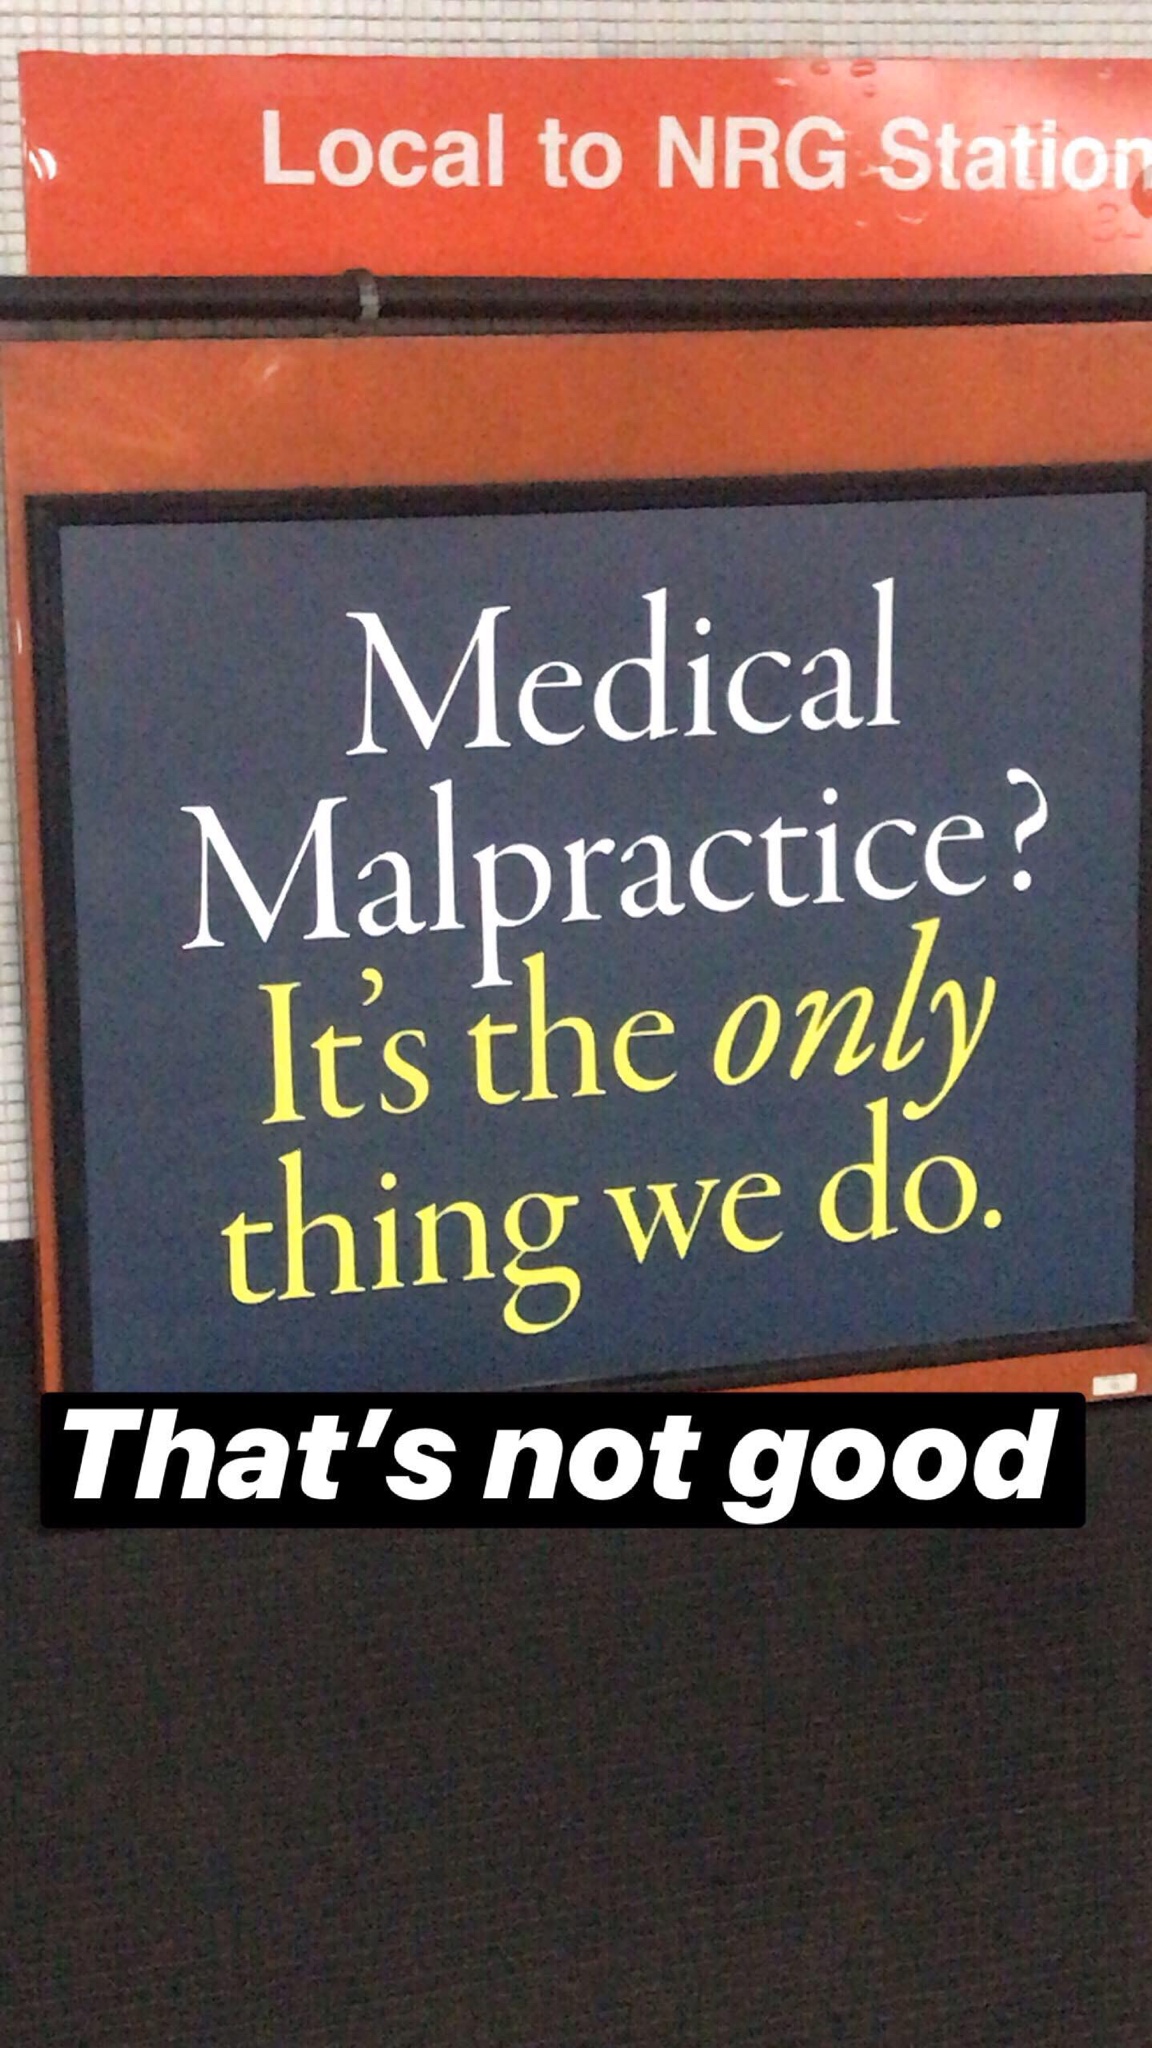 signage - Local to Nrg Station Medical Malpractice? It's the only thing we do. That's not good